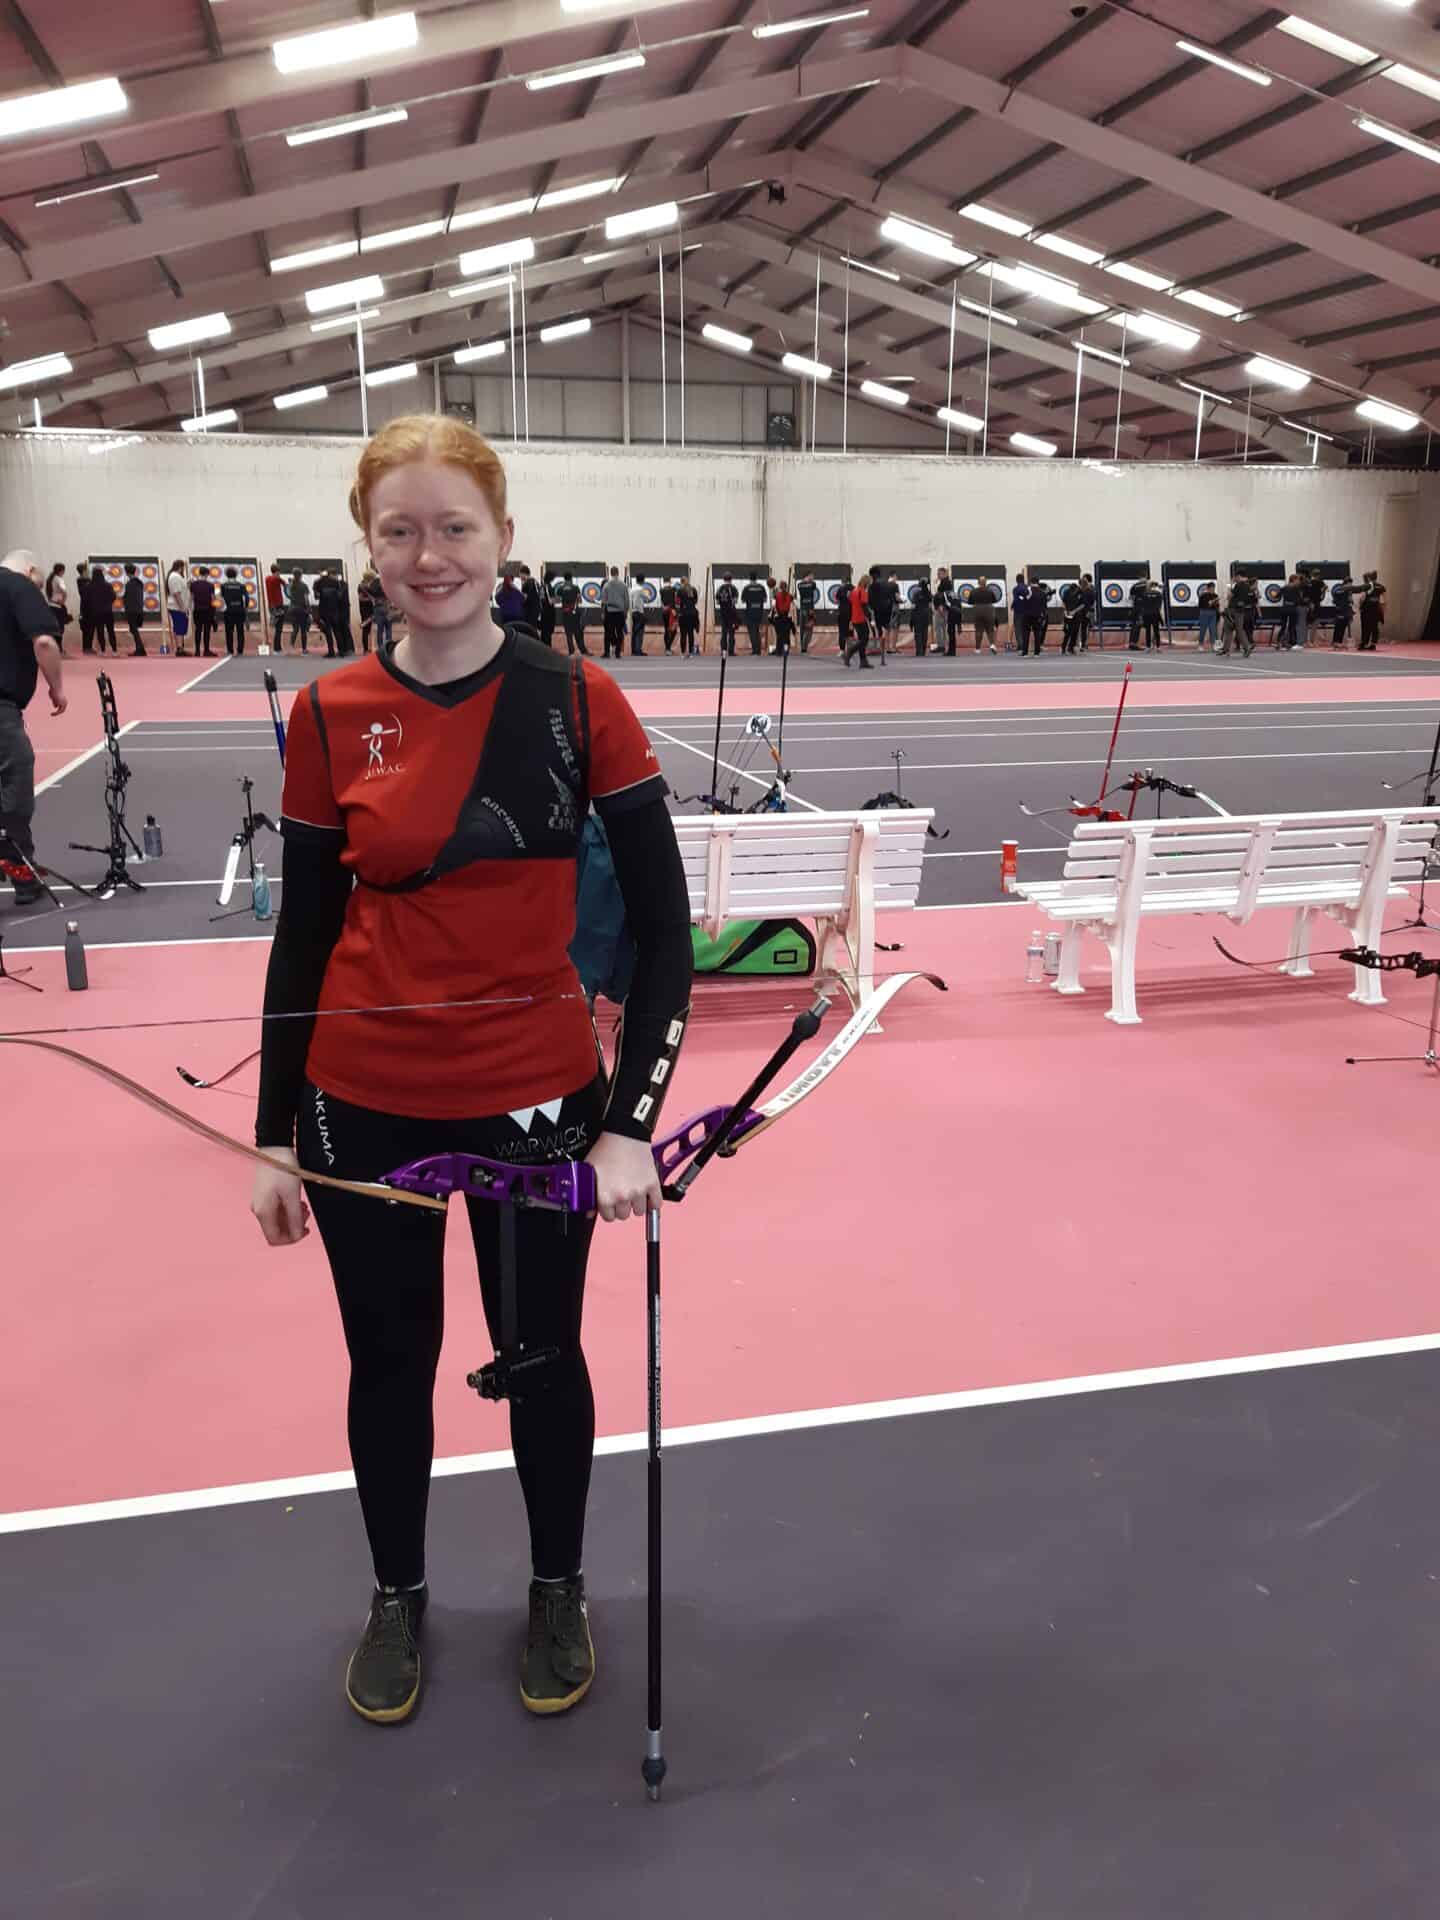 University archer training to become an Archery GB Session Coach (Level 1)